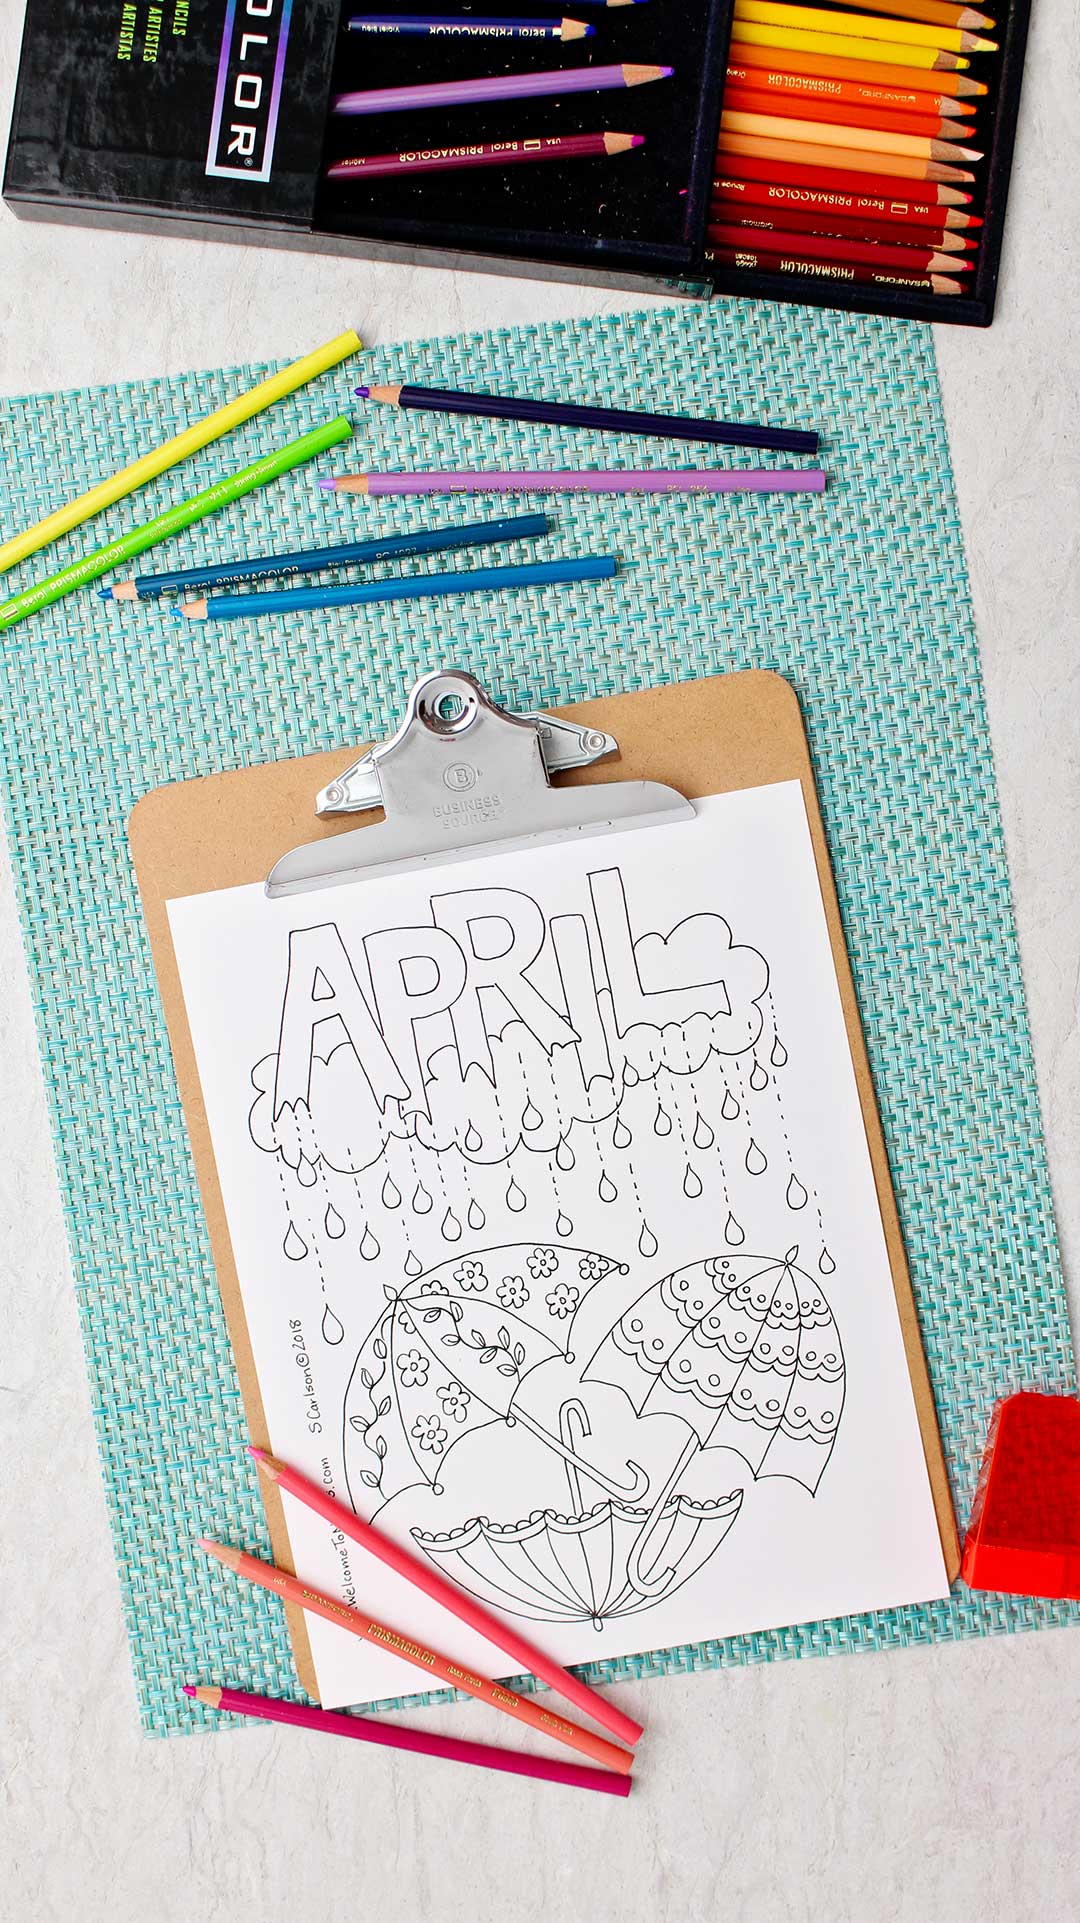 Uncolored April Showers Coloring Page on clipboard resting on an aqua placemat with colored pencils around.